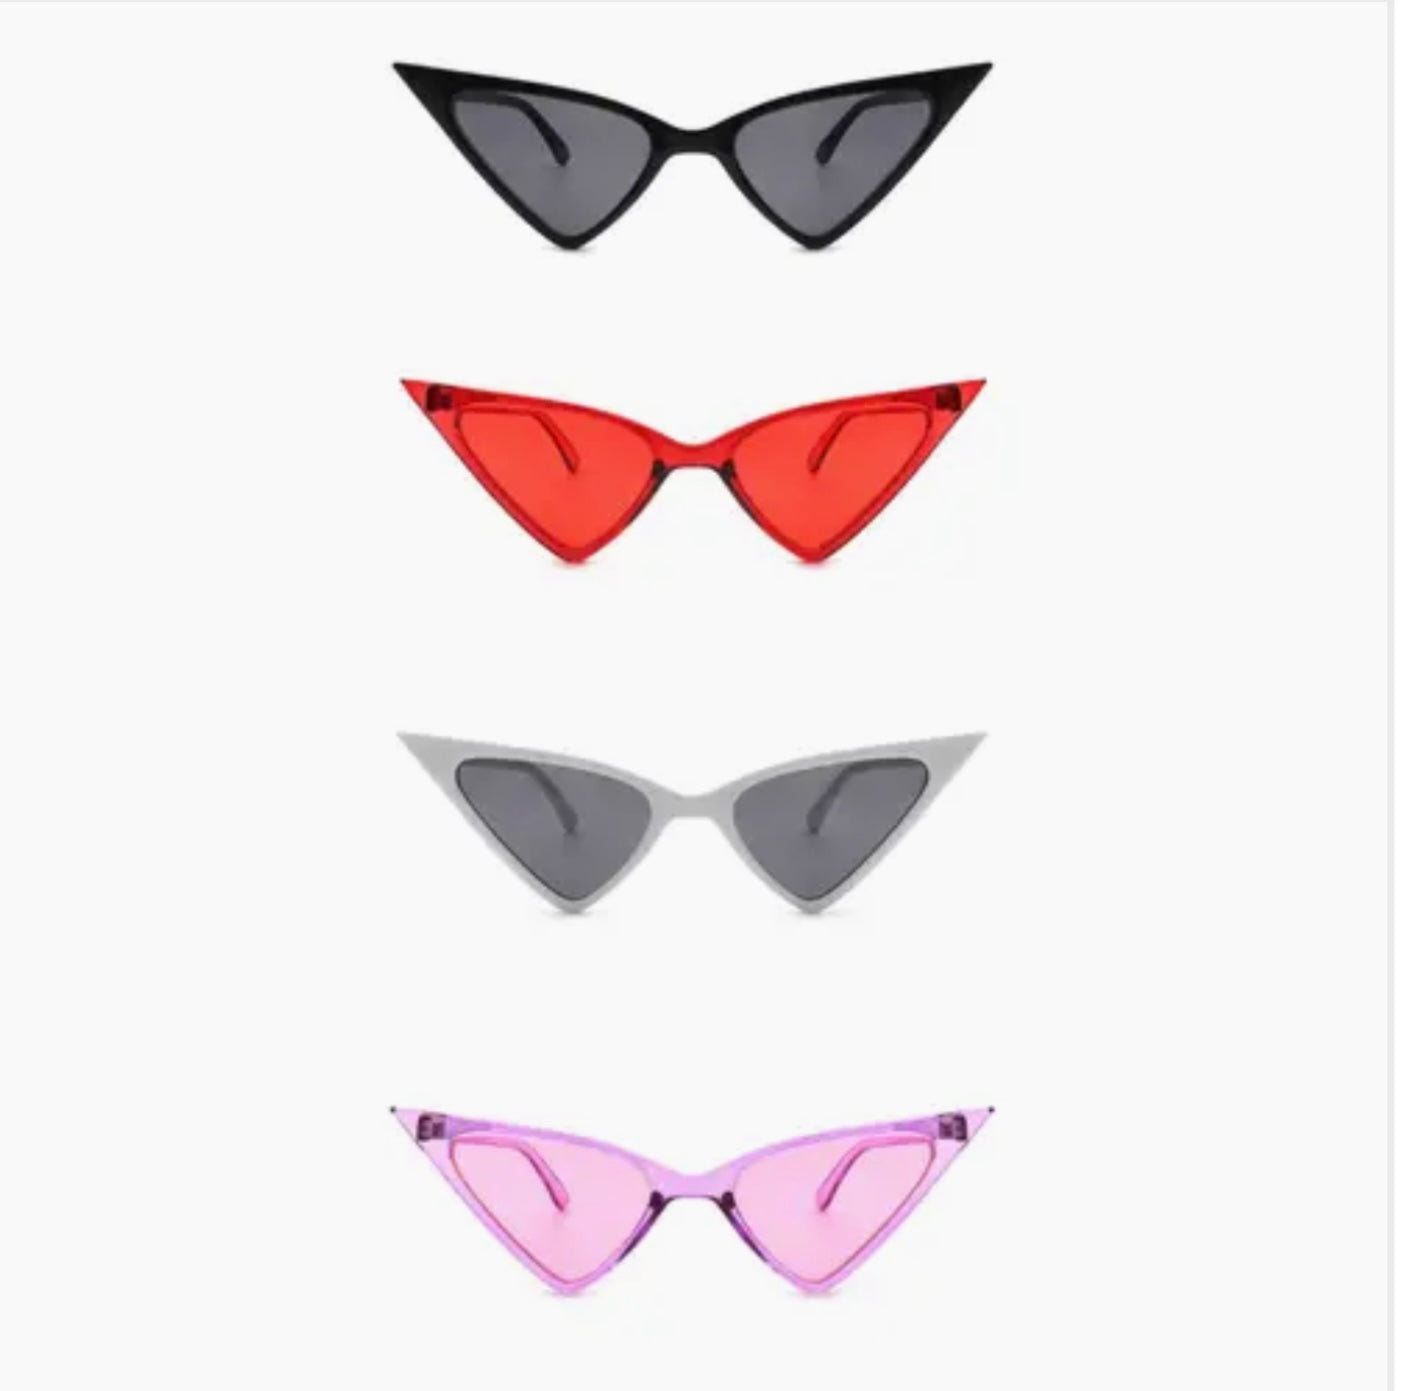 Vintage Triangle High Pointed Sunglasses